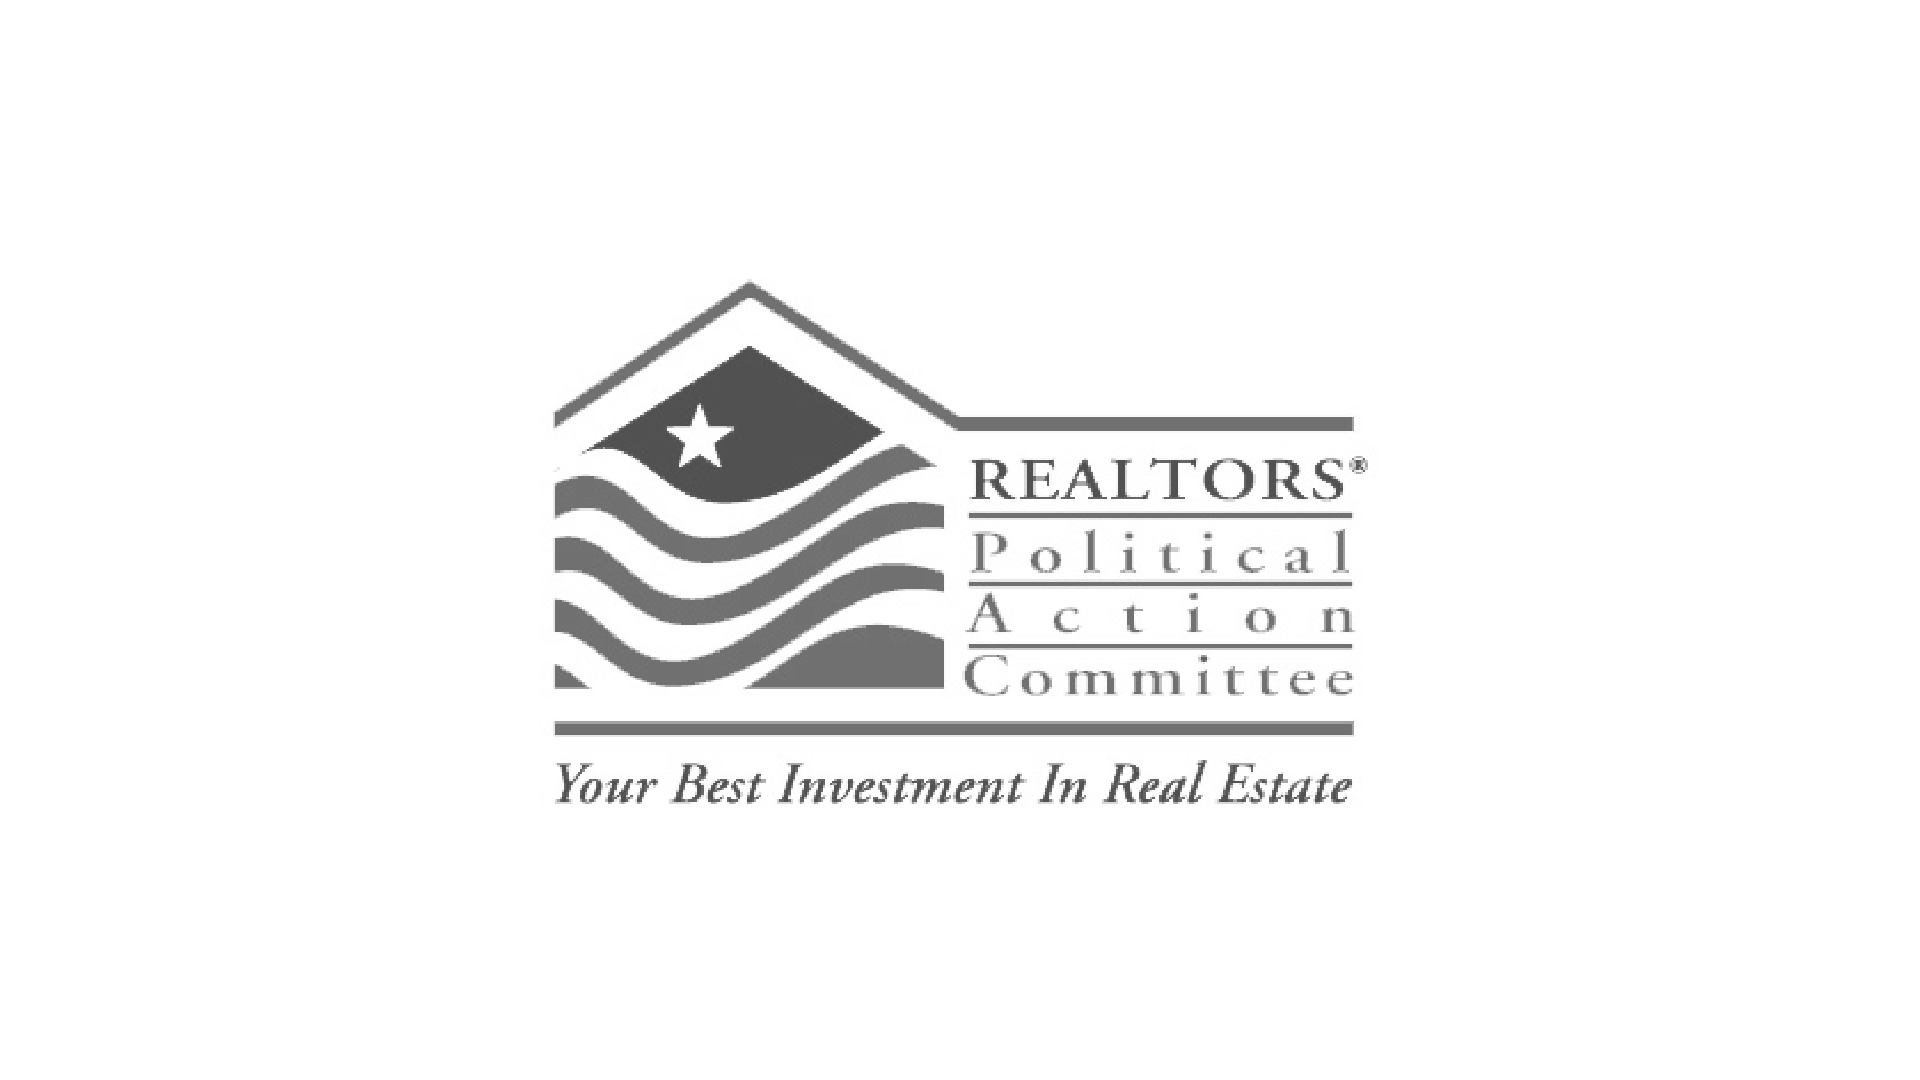 REALTOR® Political Advocacy Committee (RPAC)